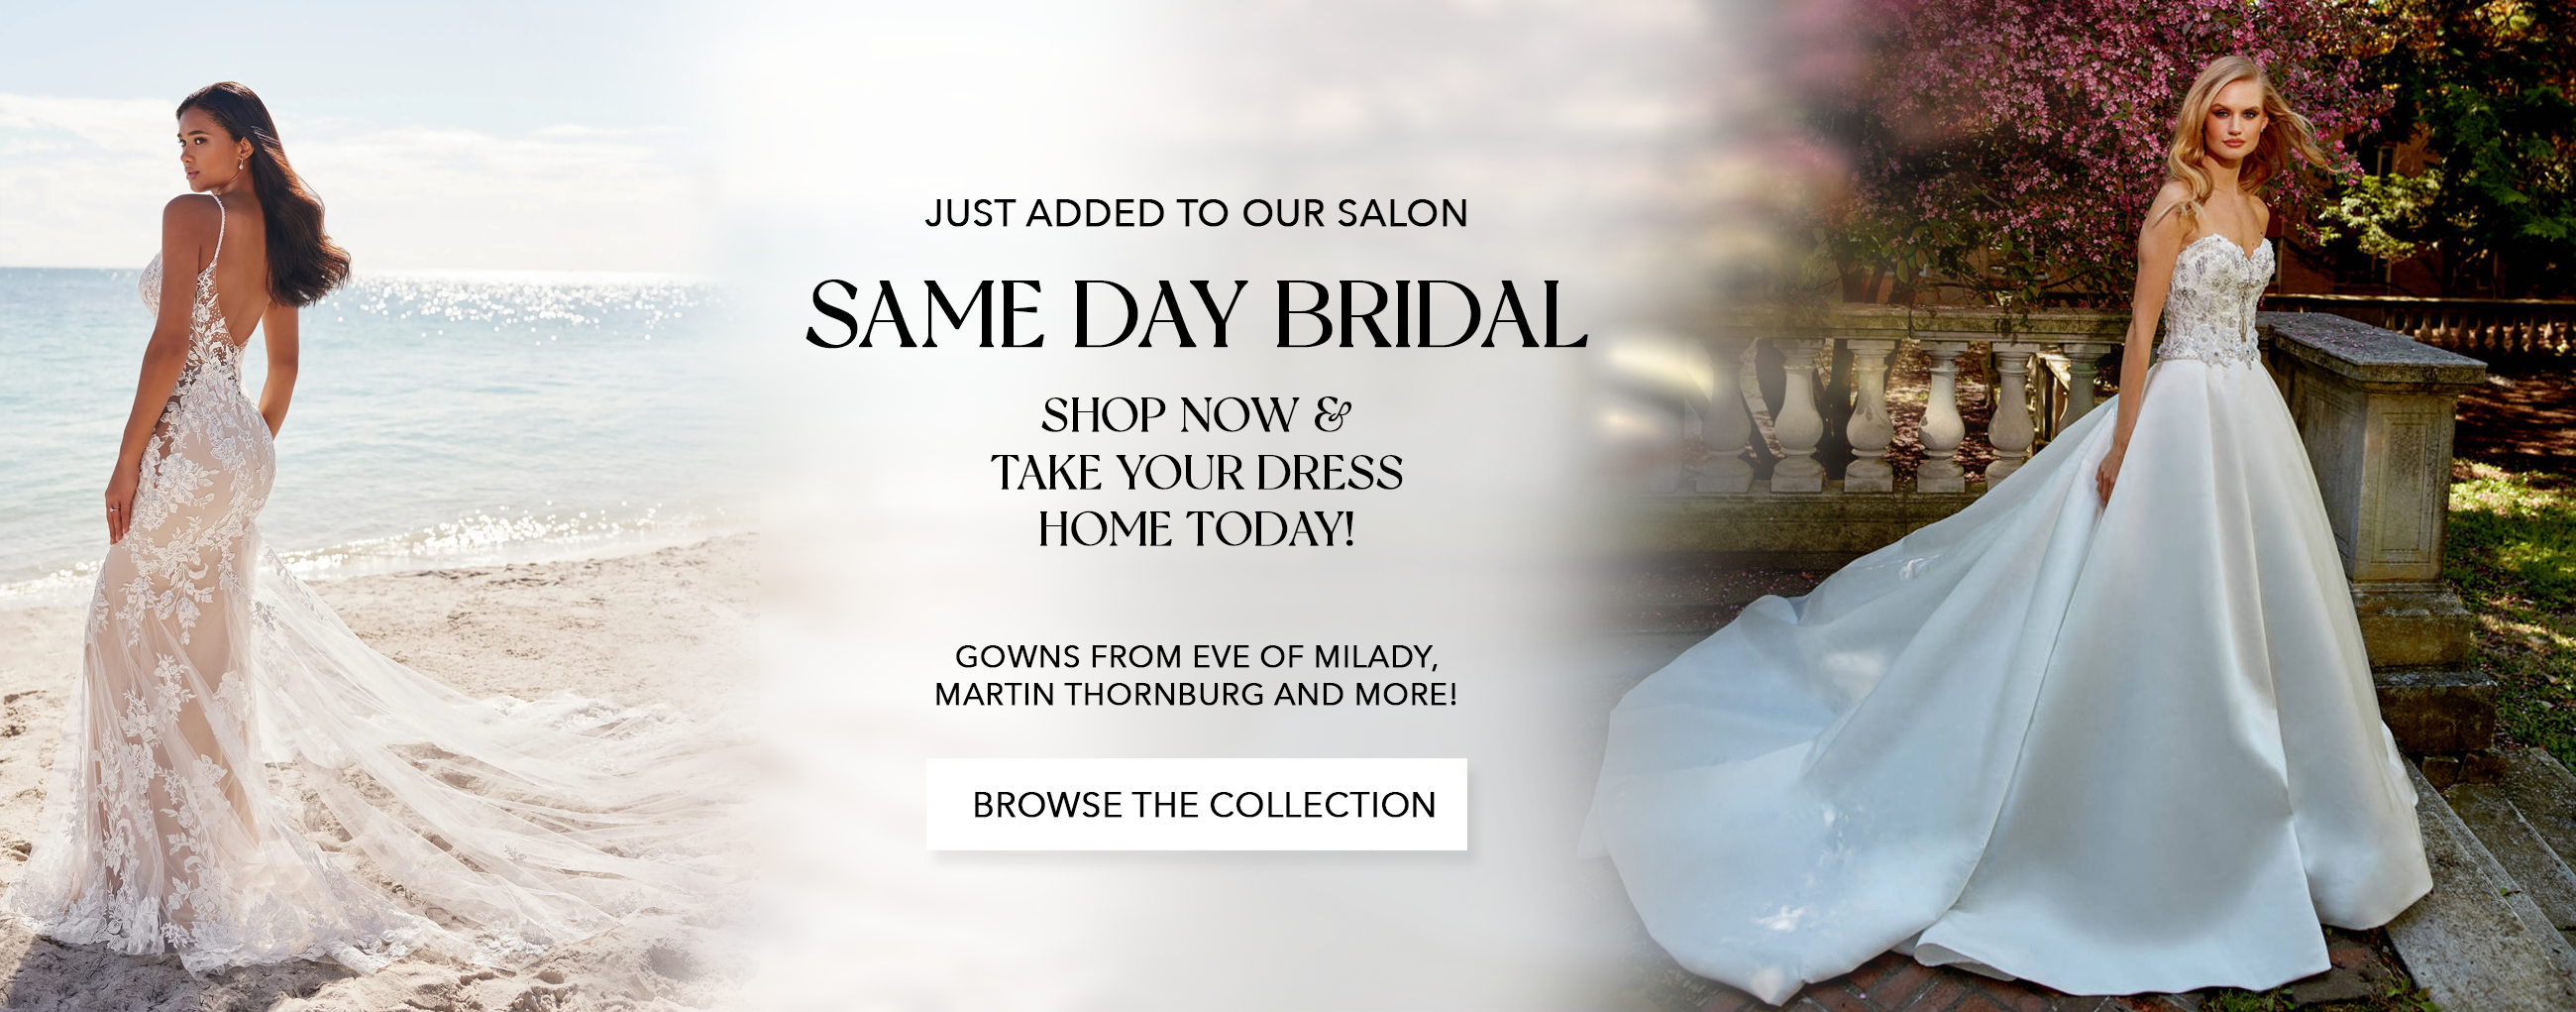 Same Day Bridal - Now Available